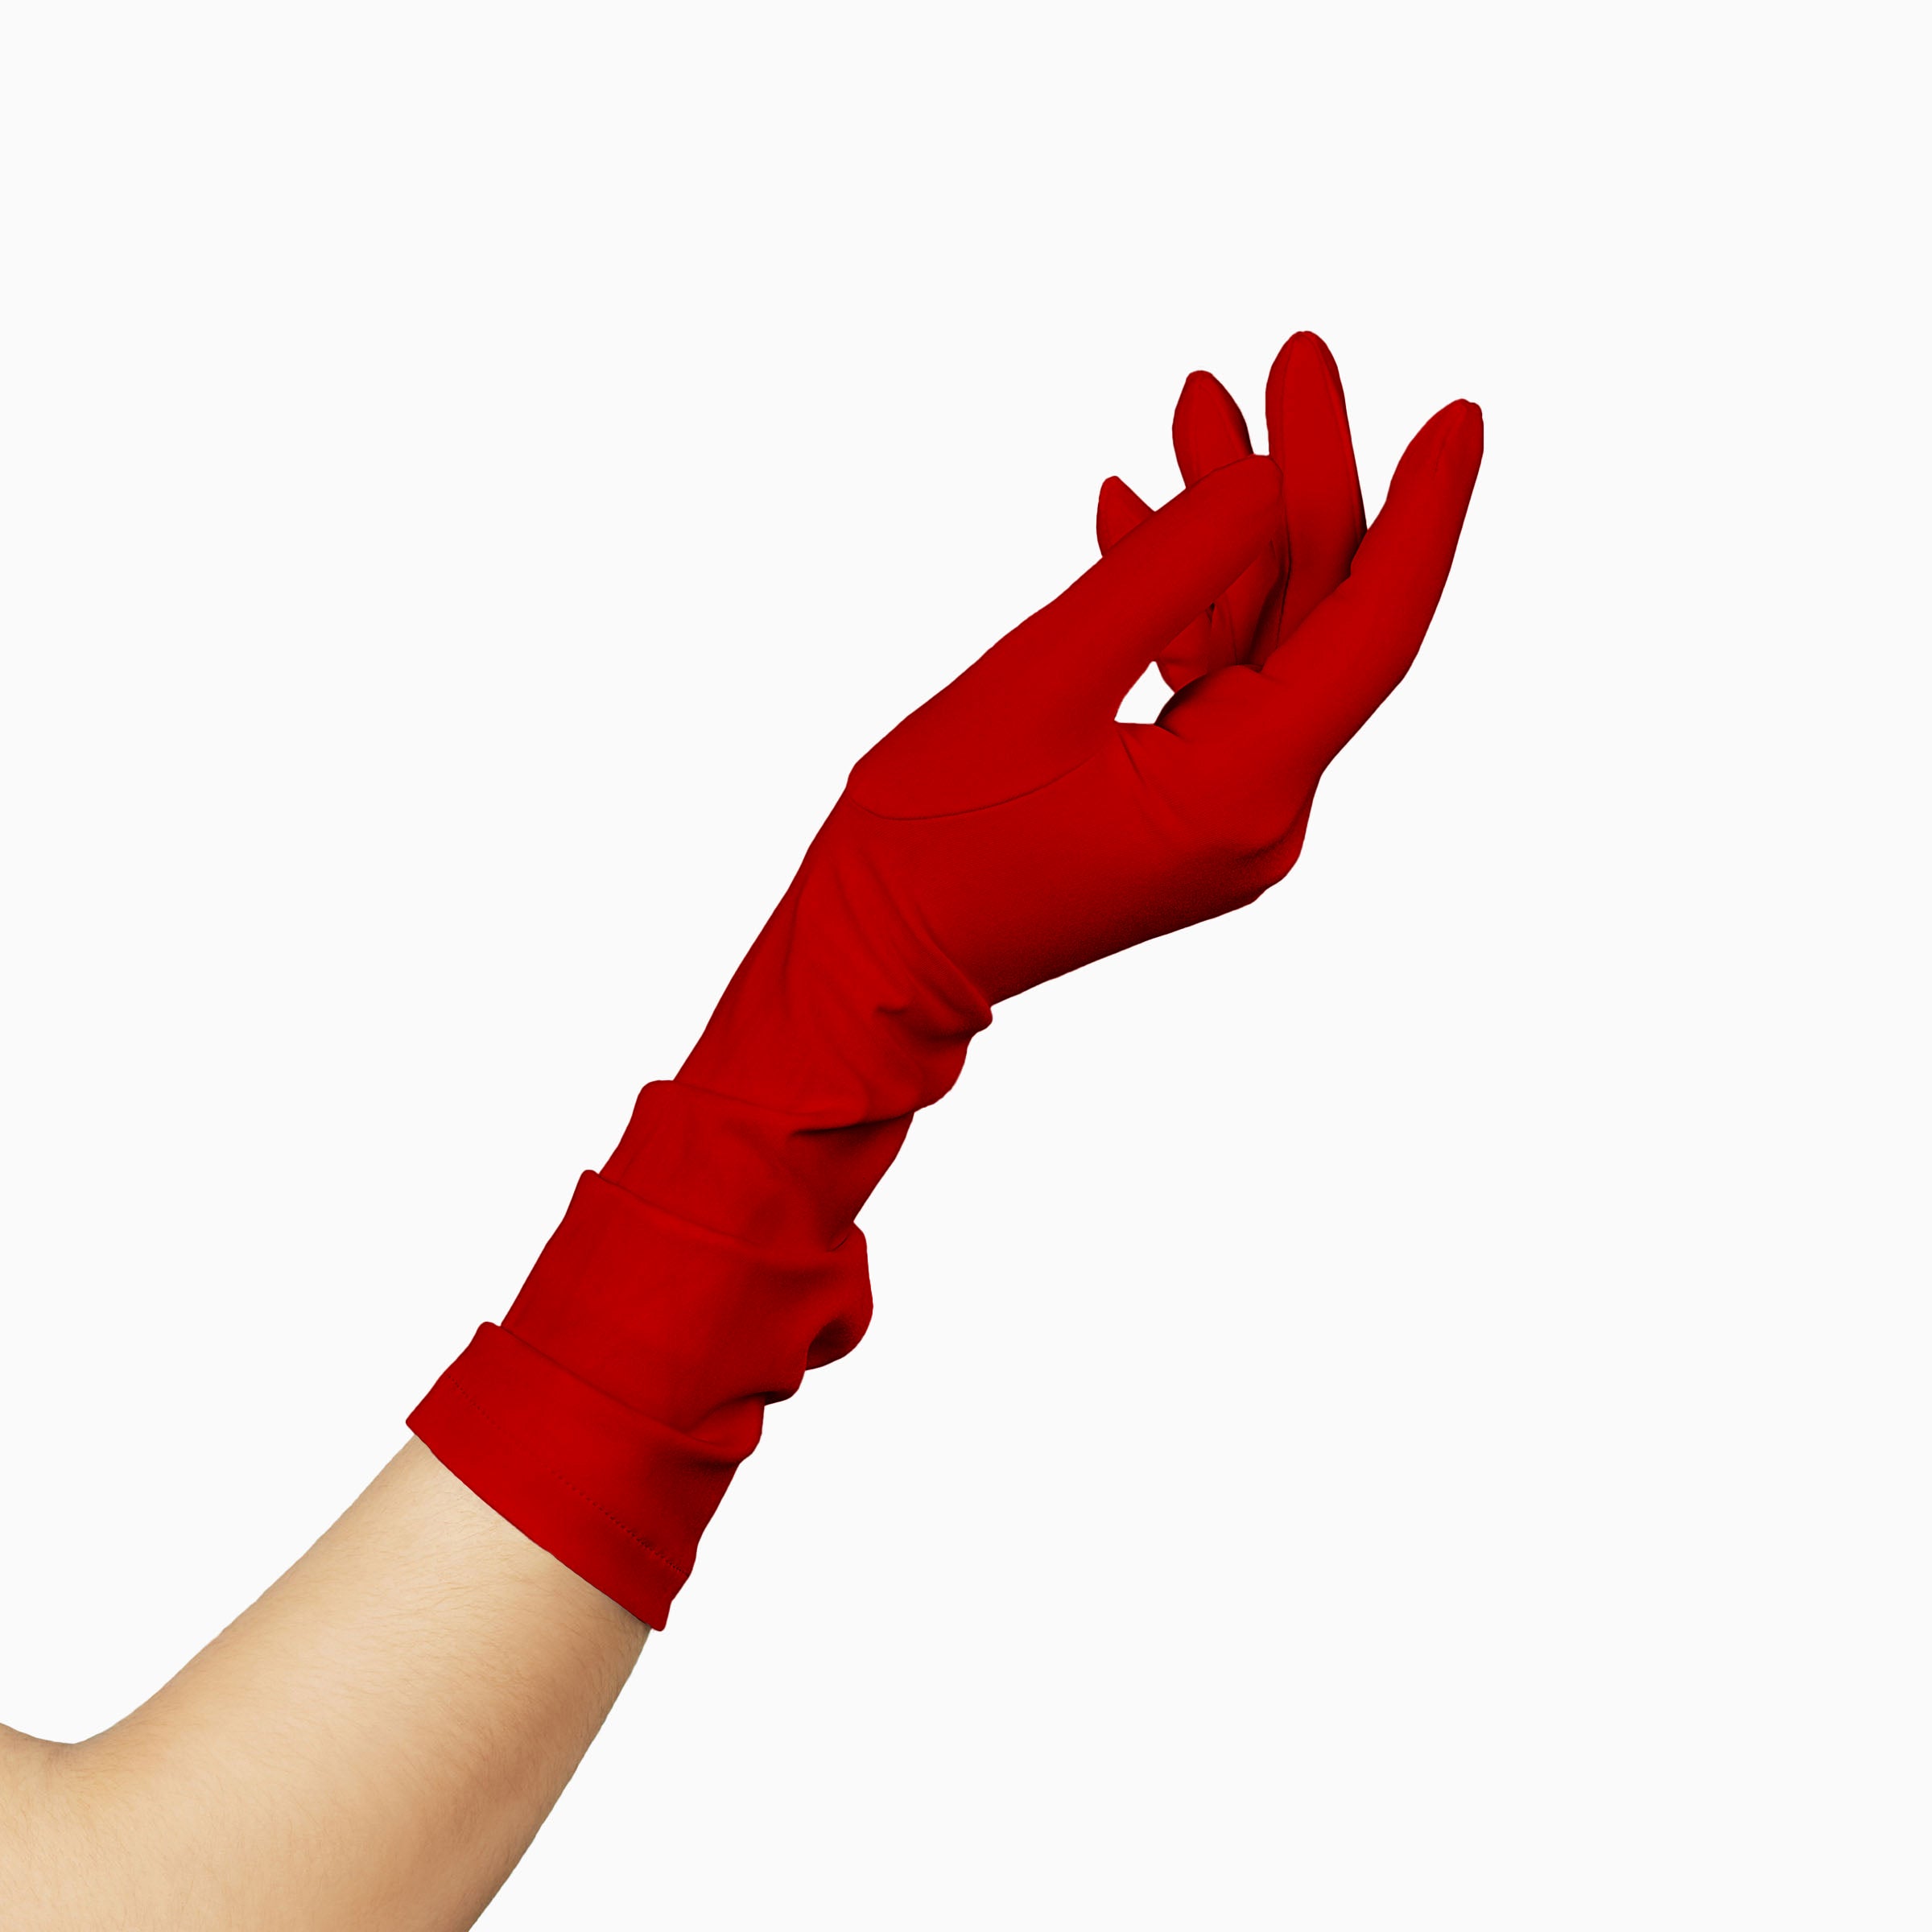 A woman's hand in THE JILL - Red Mid Length Glove - Holiday Edition gloves by LadyFinch, machine-washable and ruched.